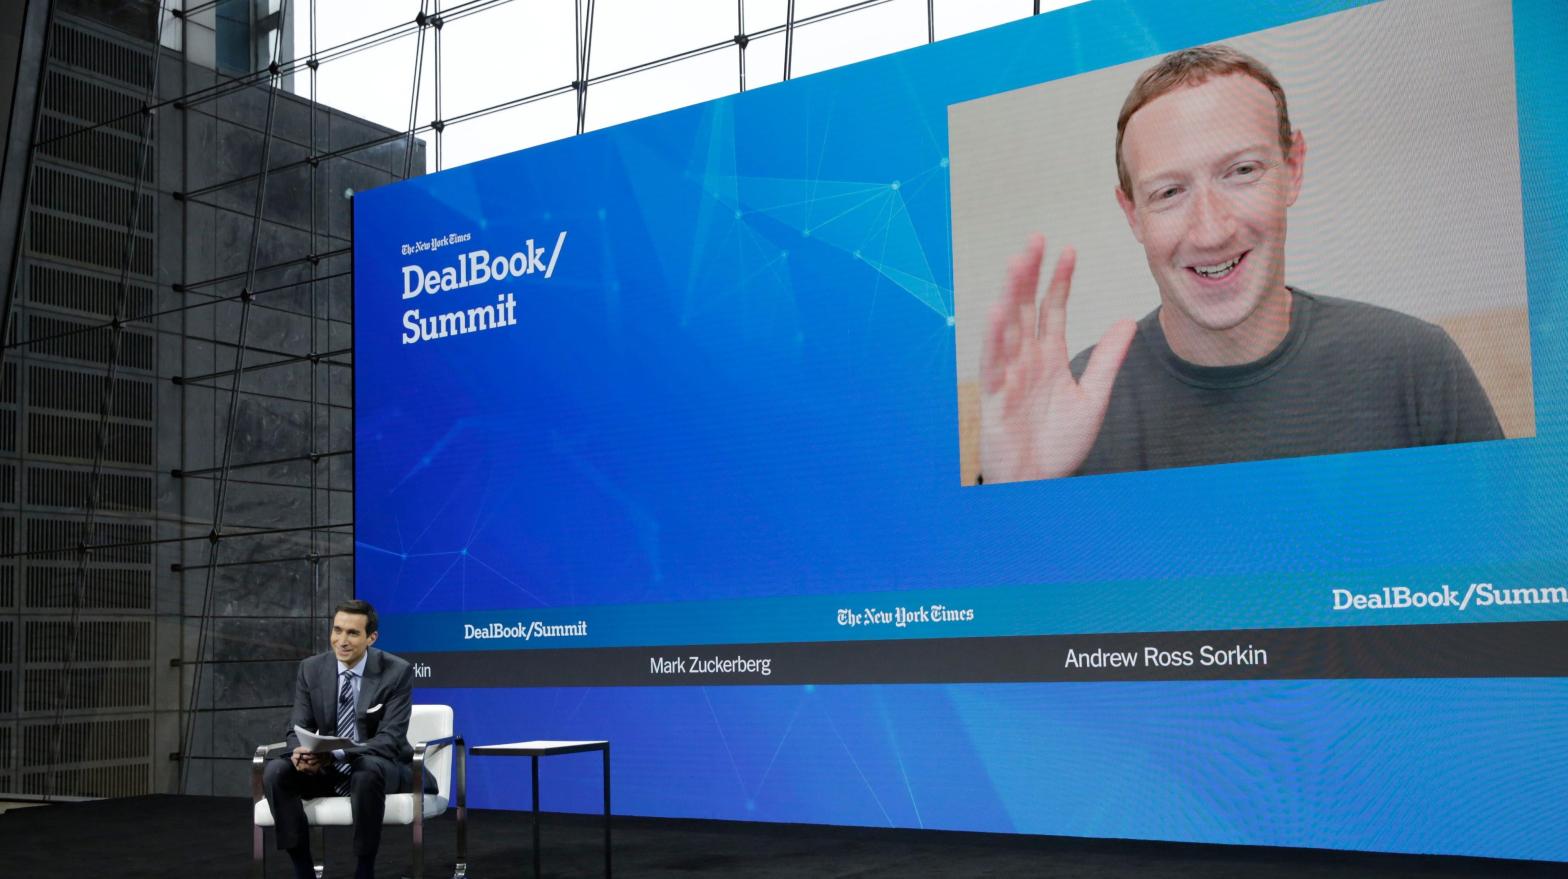 Mark Zuckerberg, shown here during an interview at the 2022 New York Times DealBook Summit, has avoided depositions in lawsuits regarding the massive Cambridge Analytica scandal. (Photo: Thos Robinson, Getty Images)